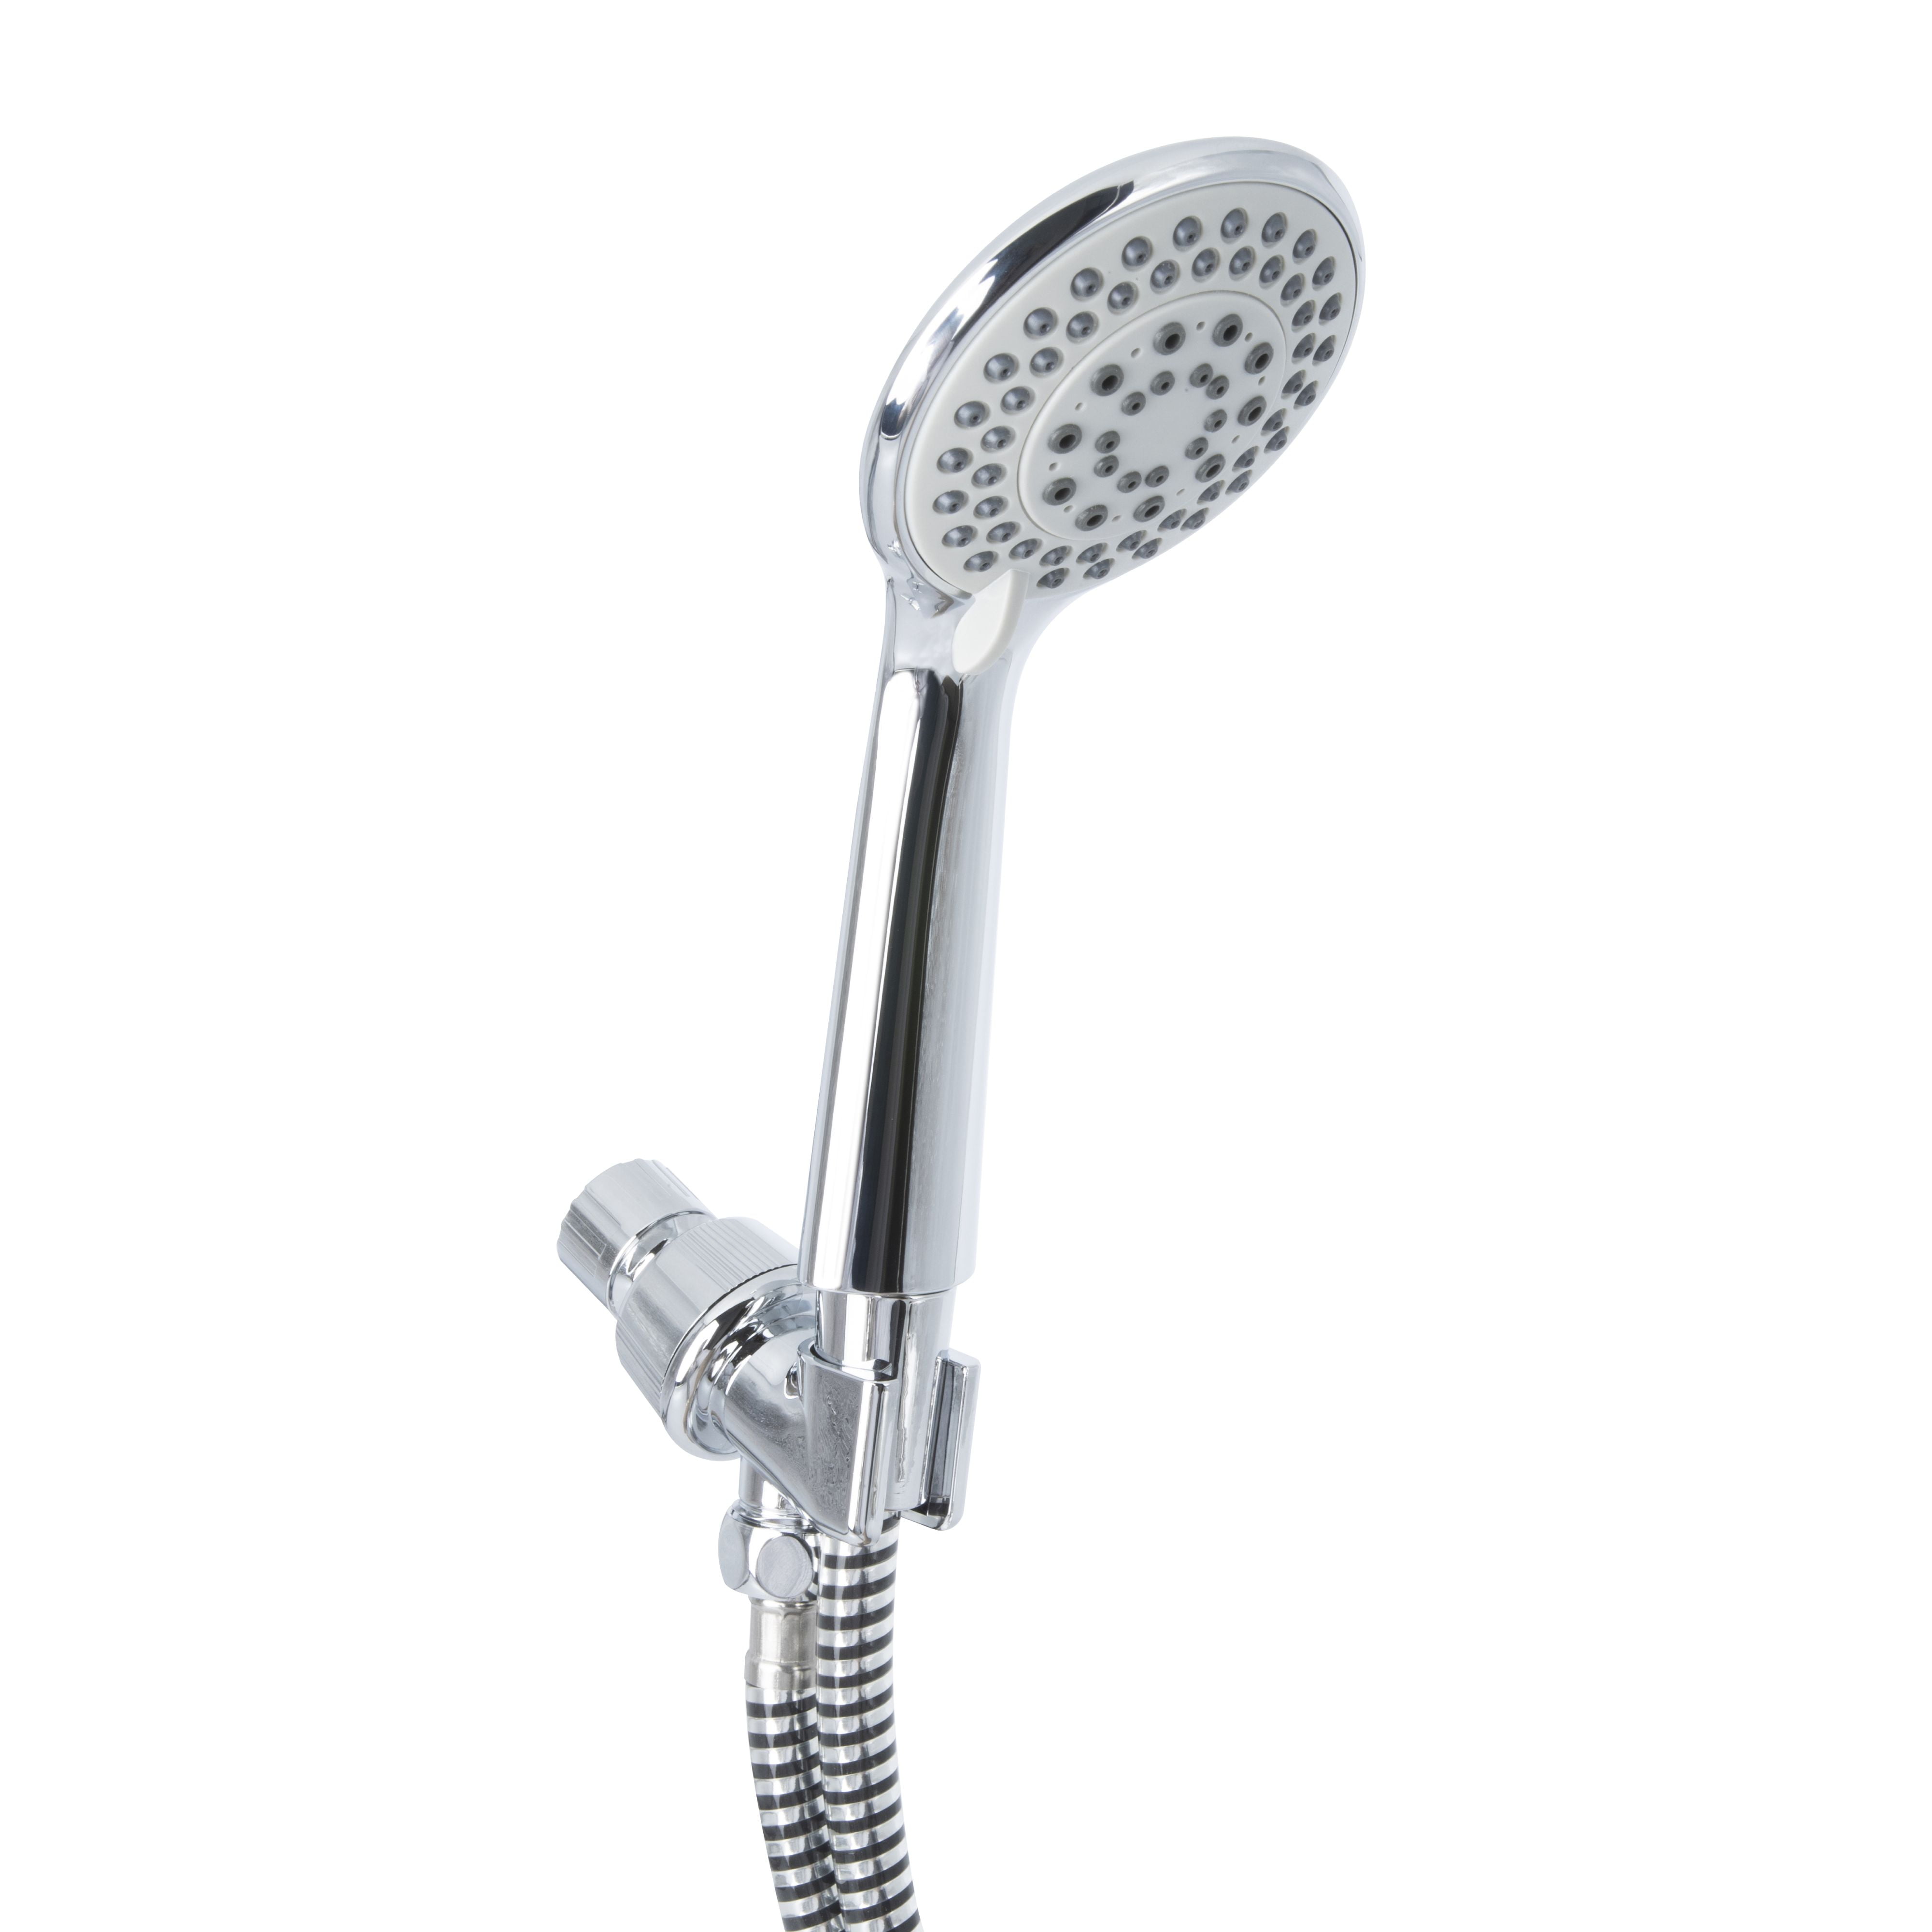 Home Expressions ABS Chrome 5 Function Handheld Shower Head DIA 4.7 Home Expressions Inc.